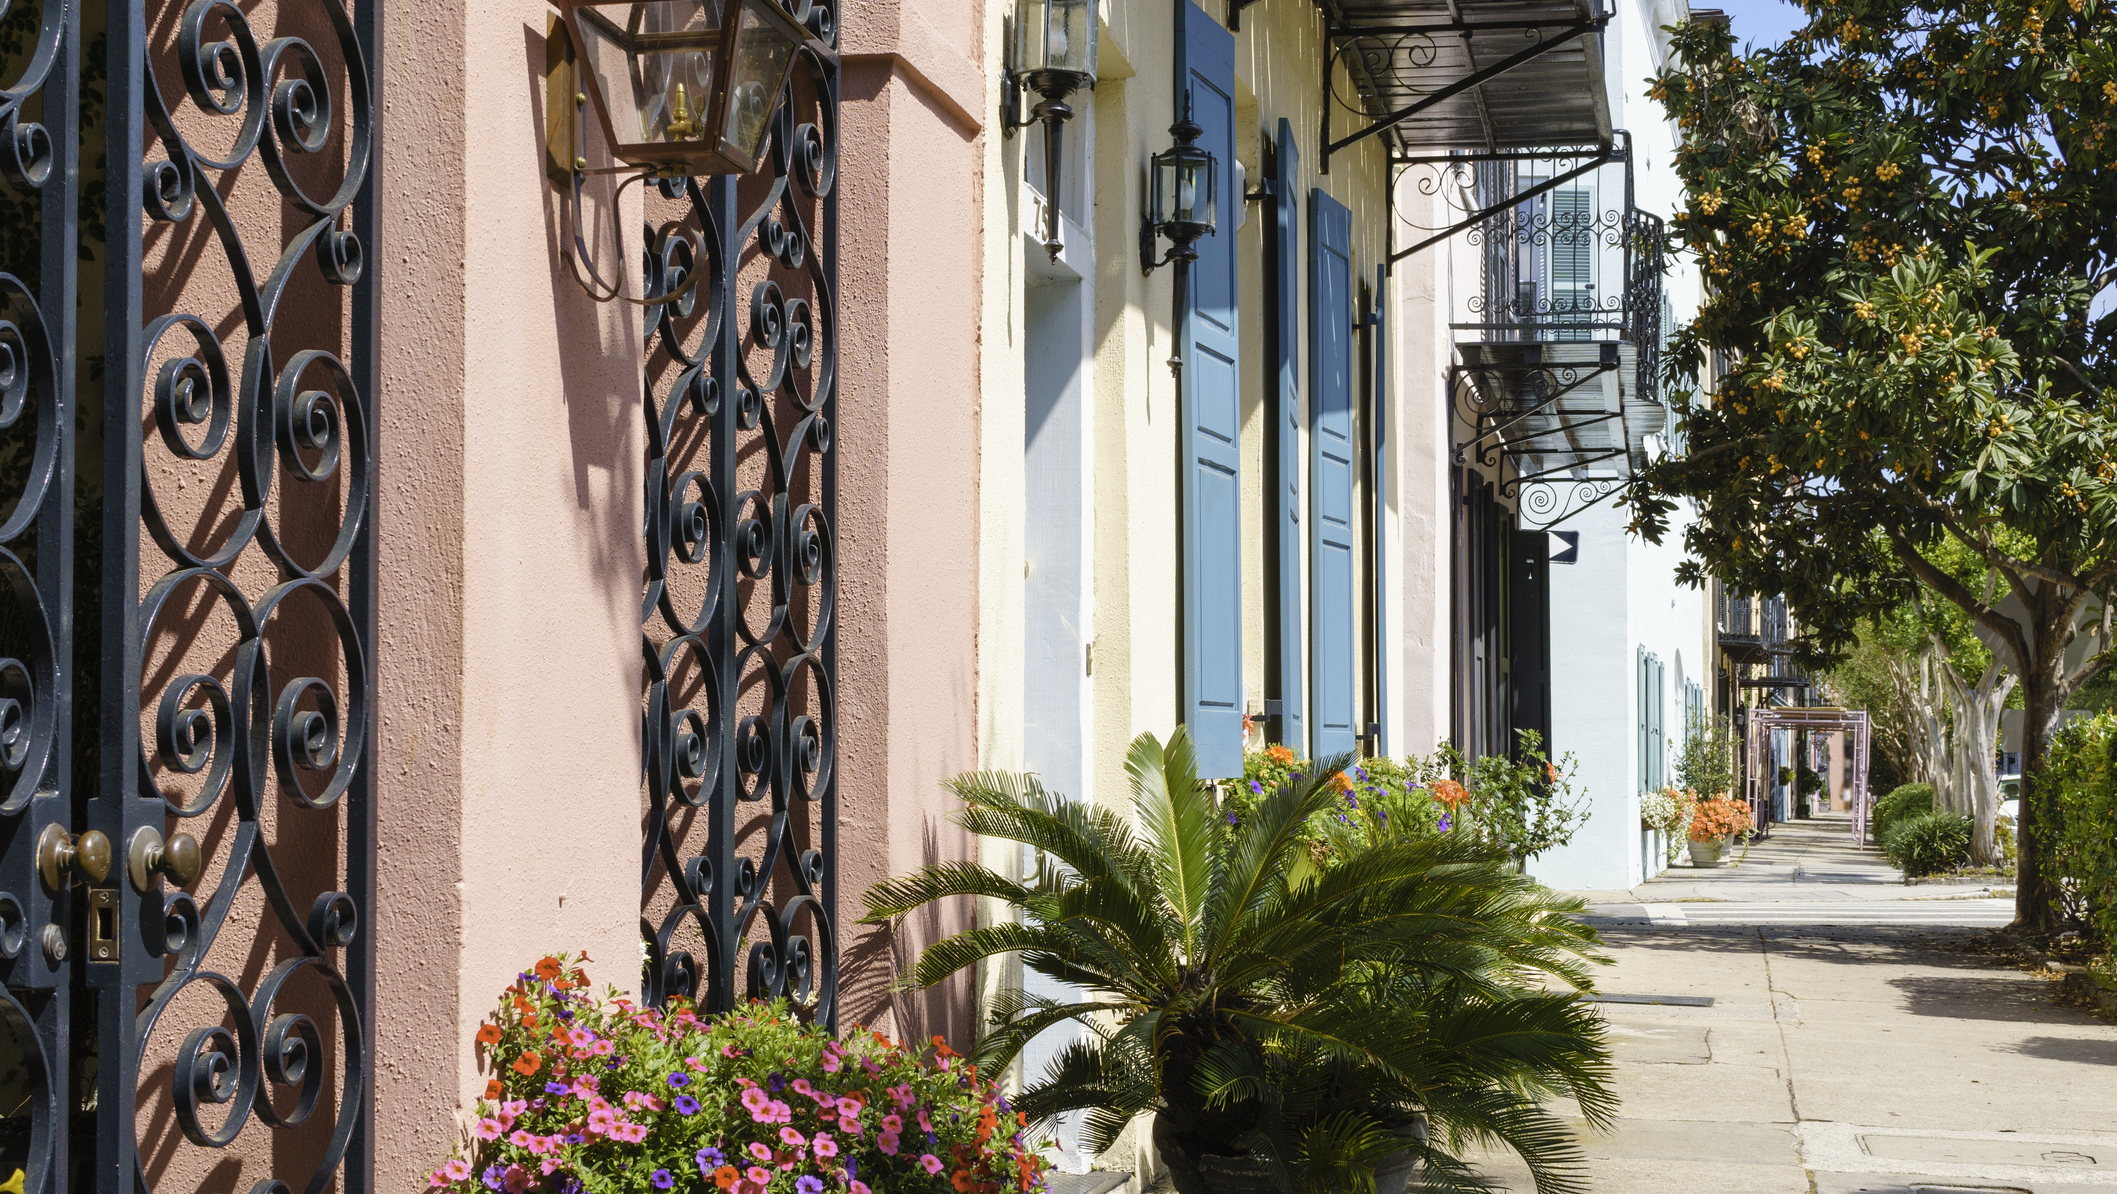 One of the alleyways you'll visit on certain Historic Charleston Tour